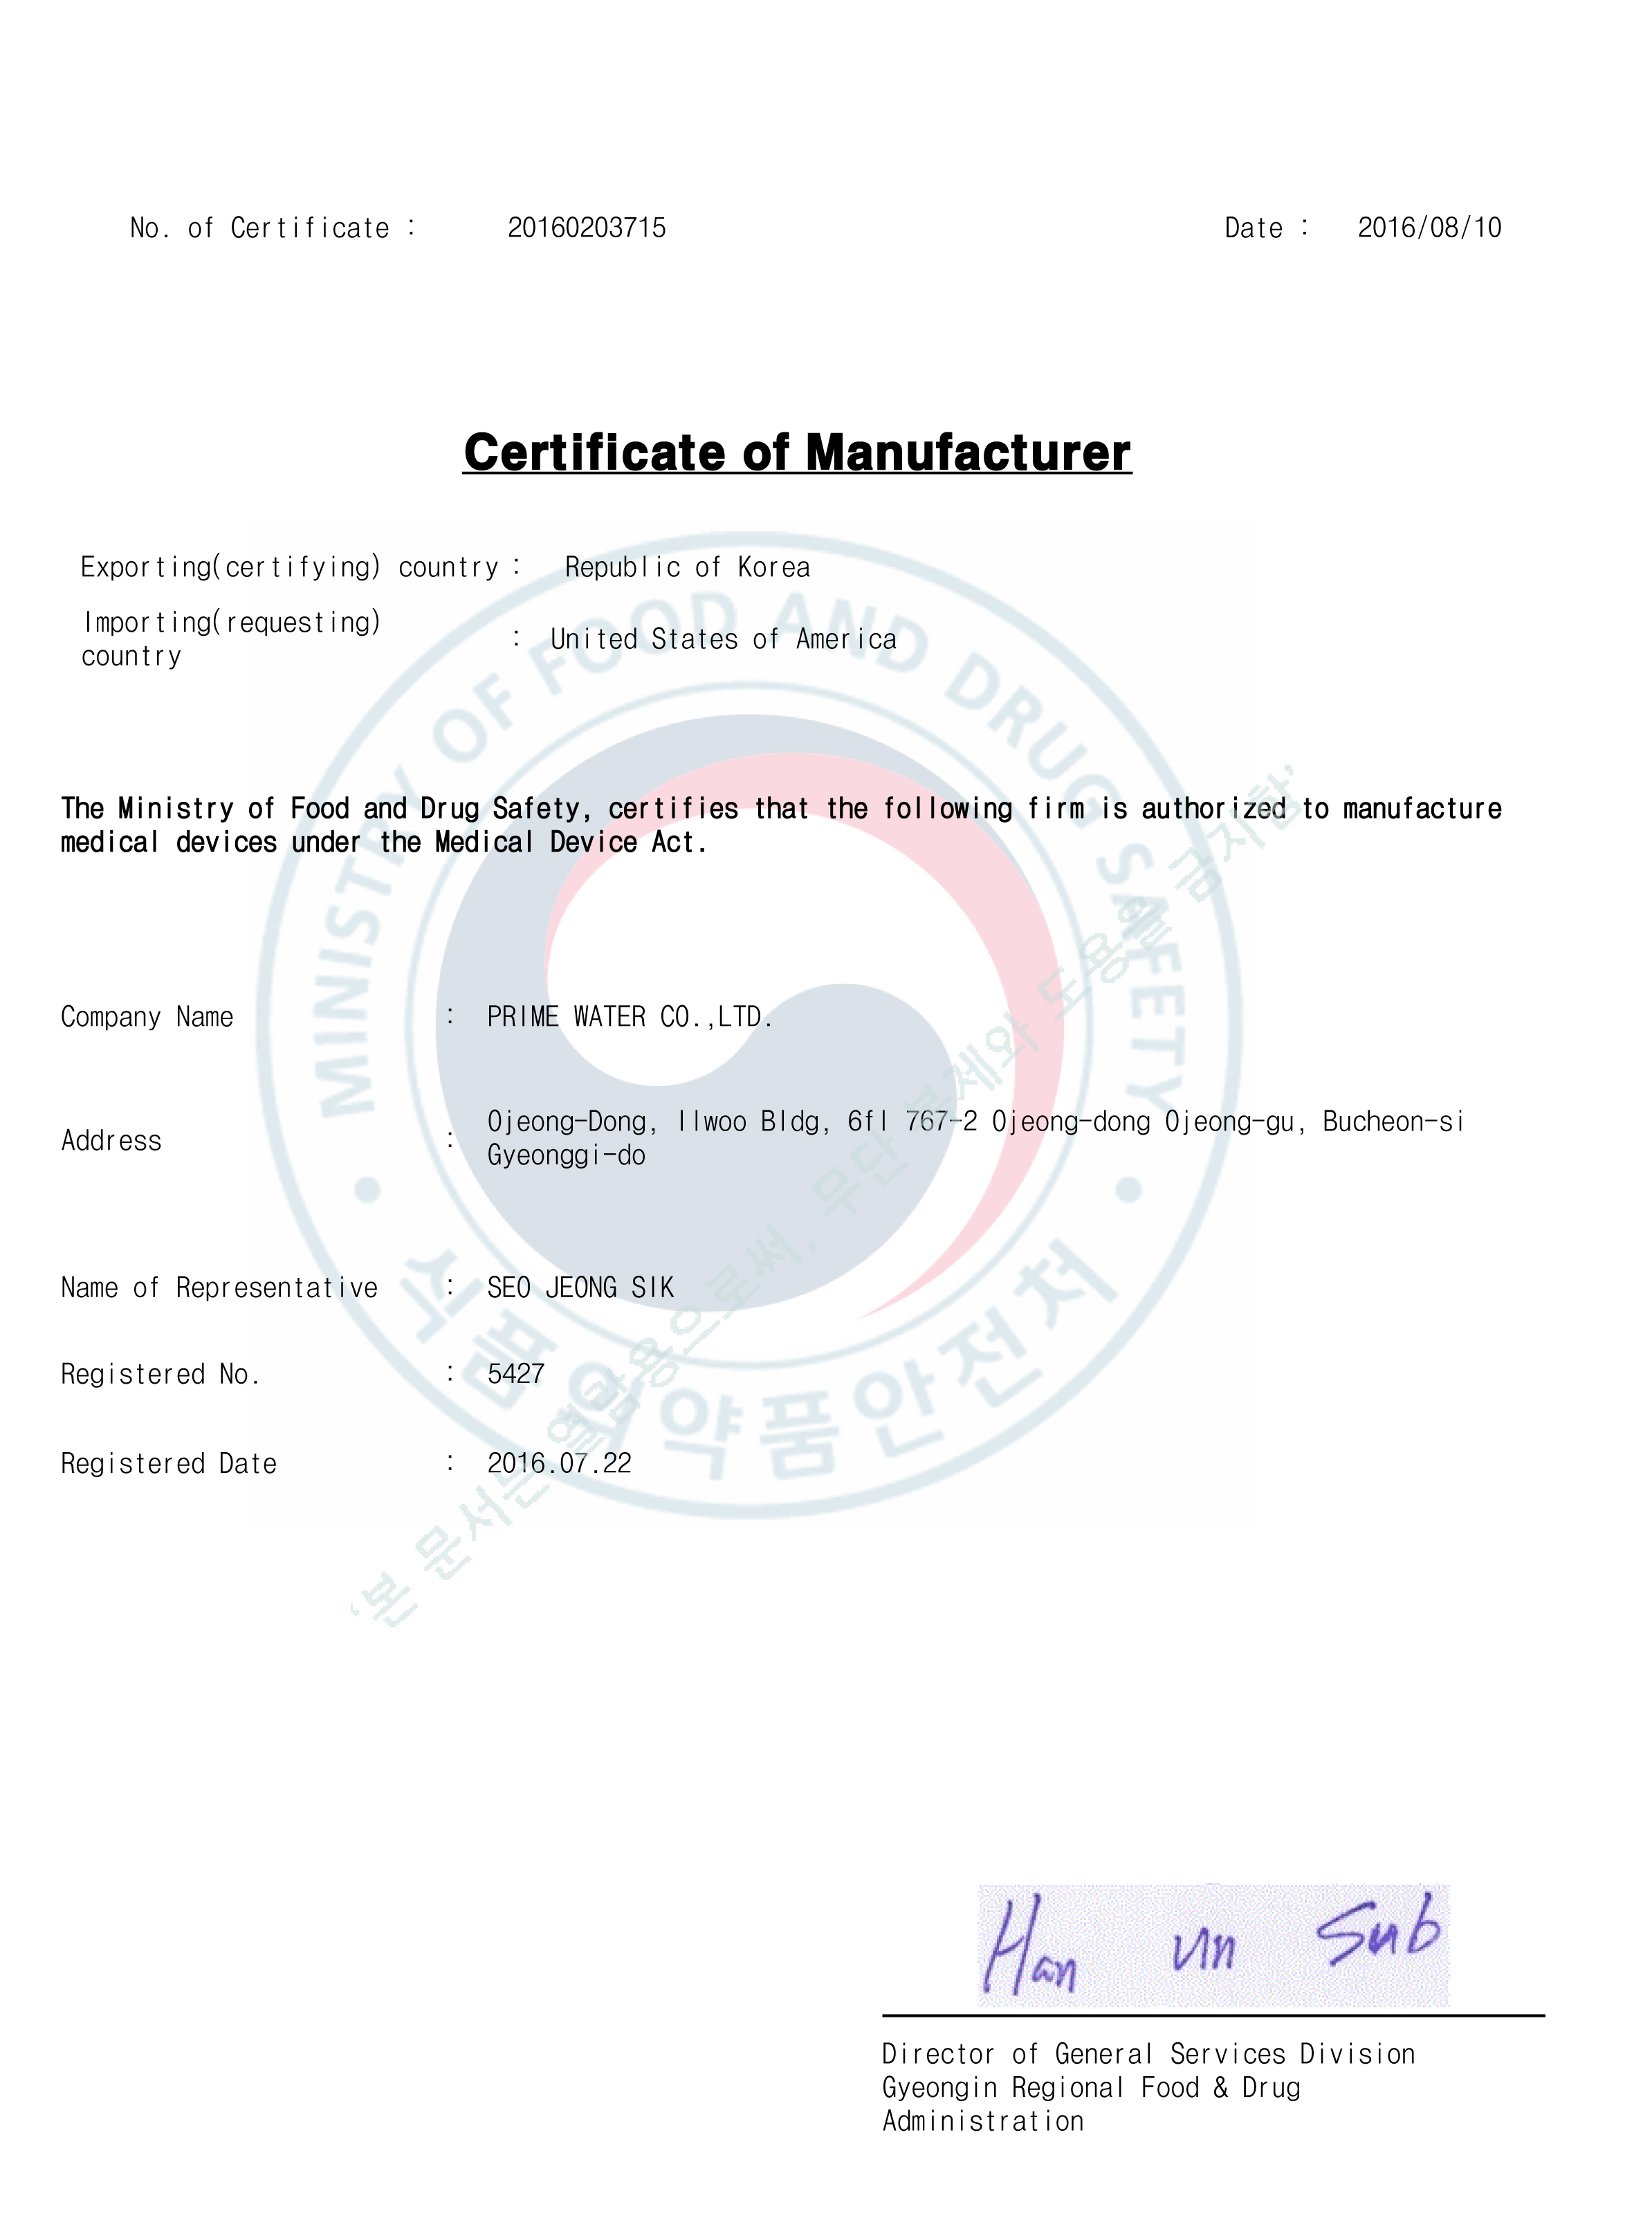 Medical Device Cert. For USD